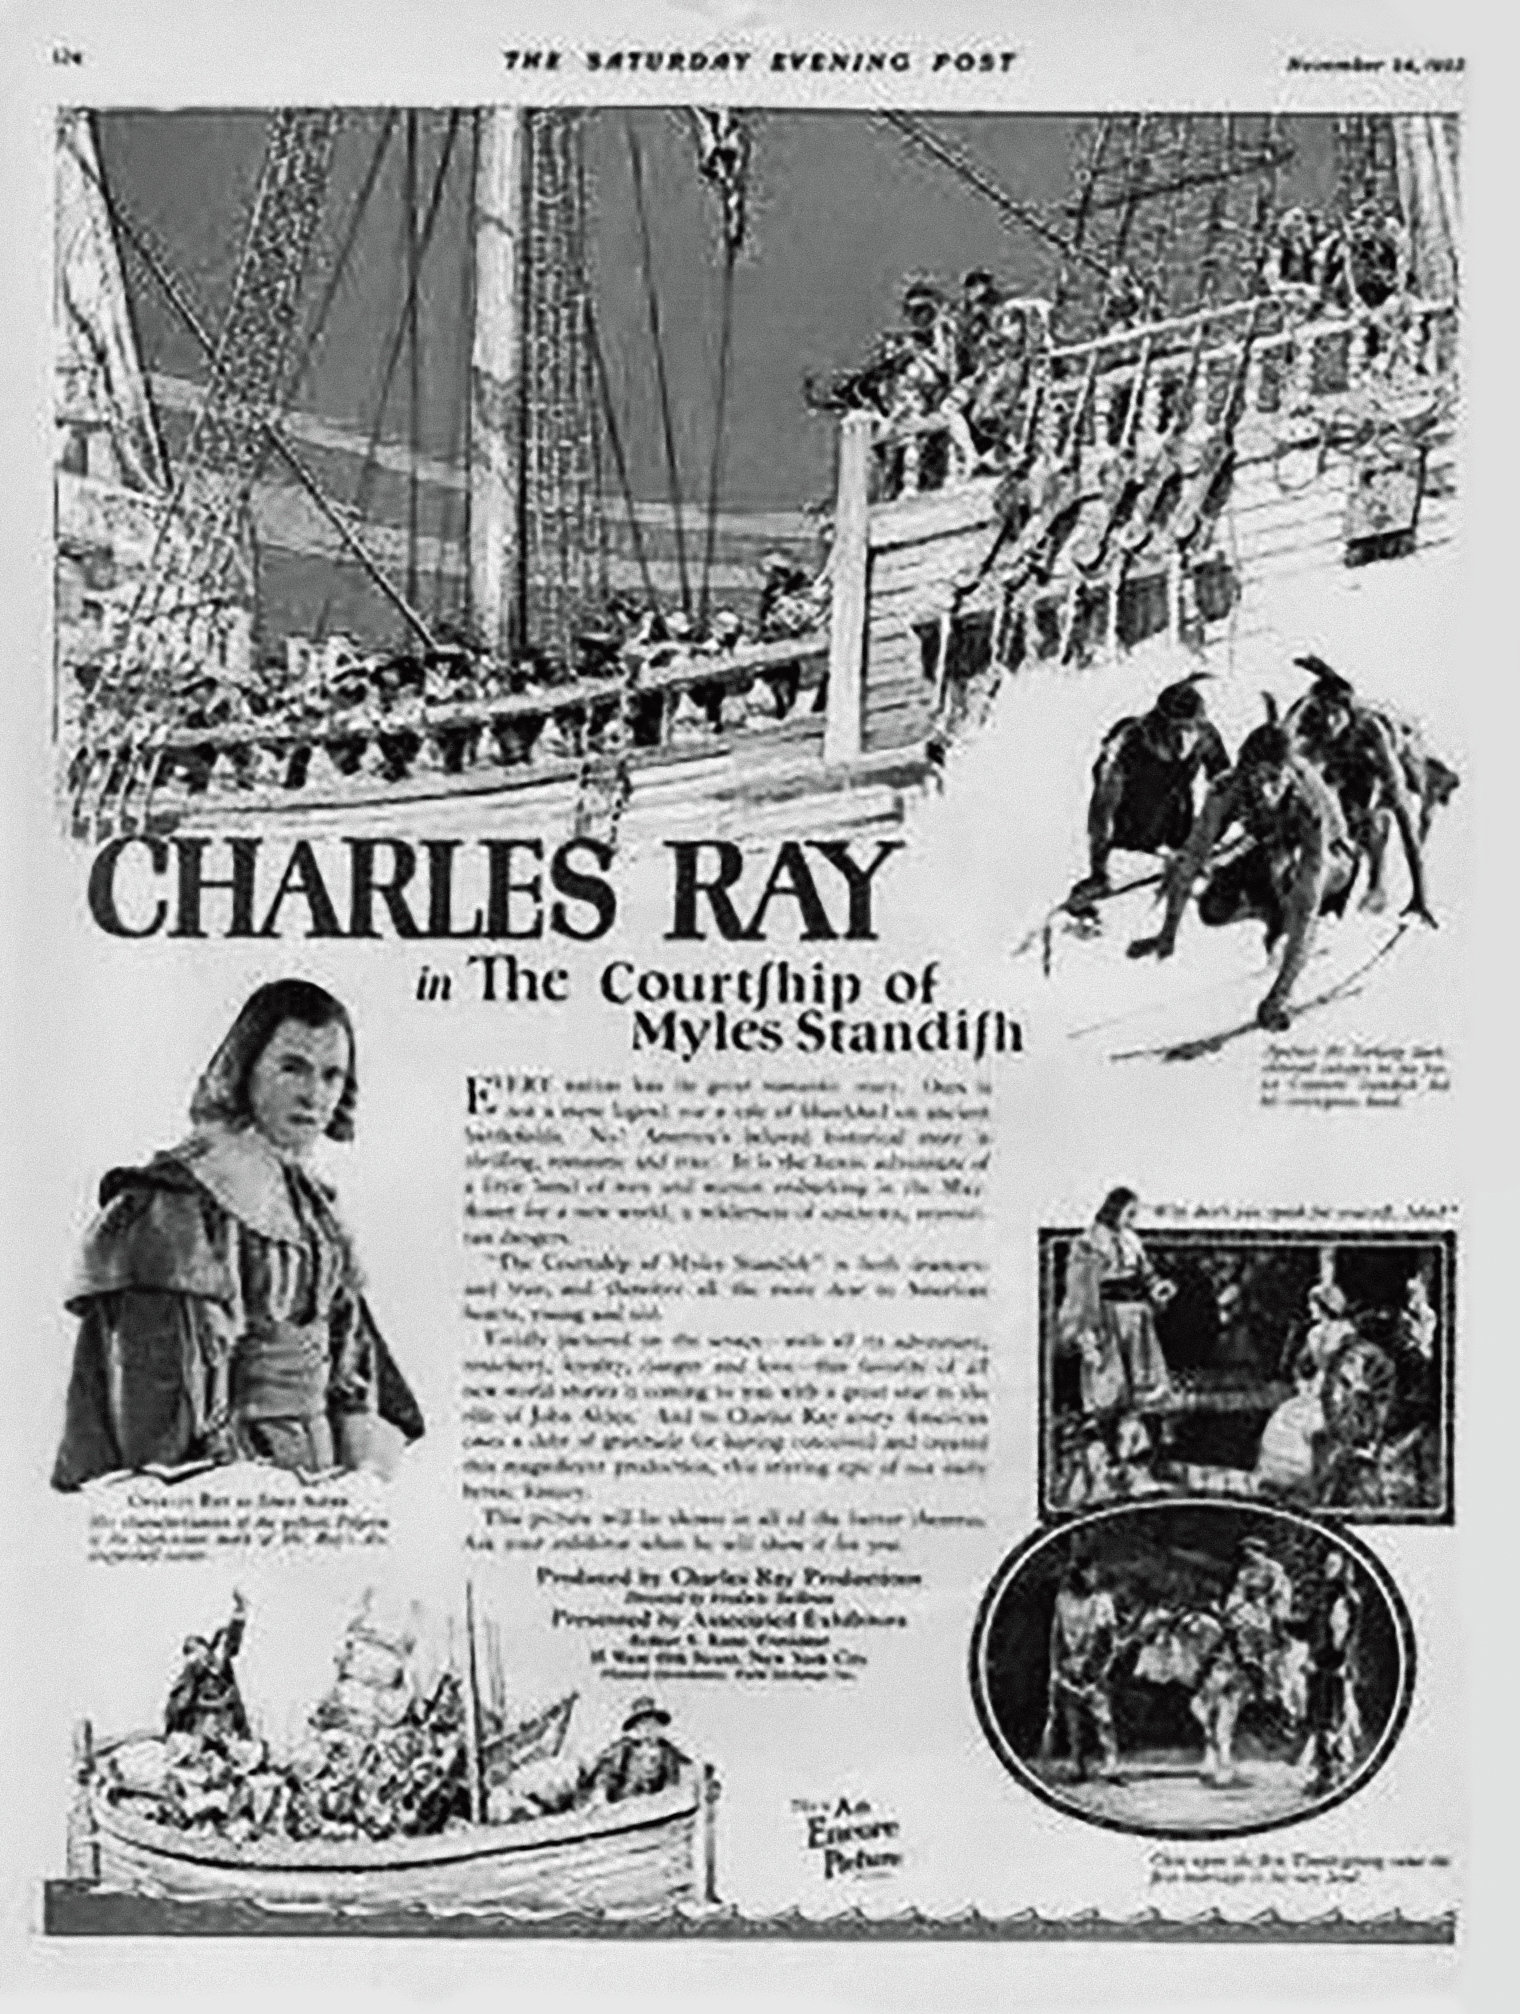 CHARLES RAY PRODUCTIONS, 1923